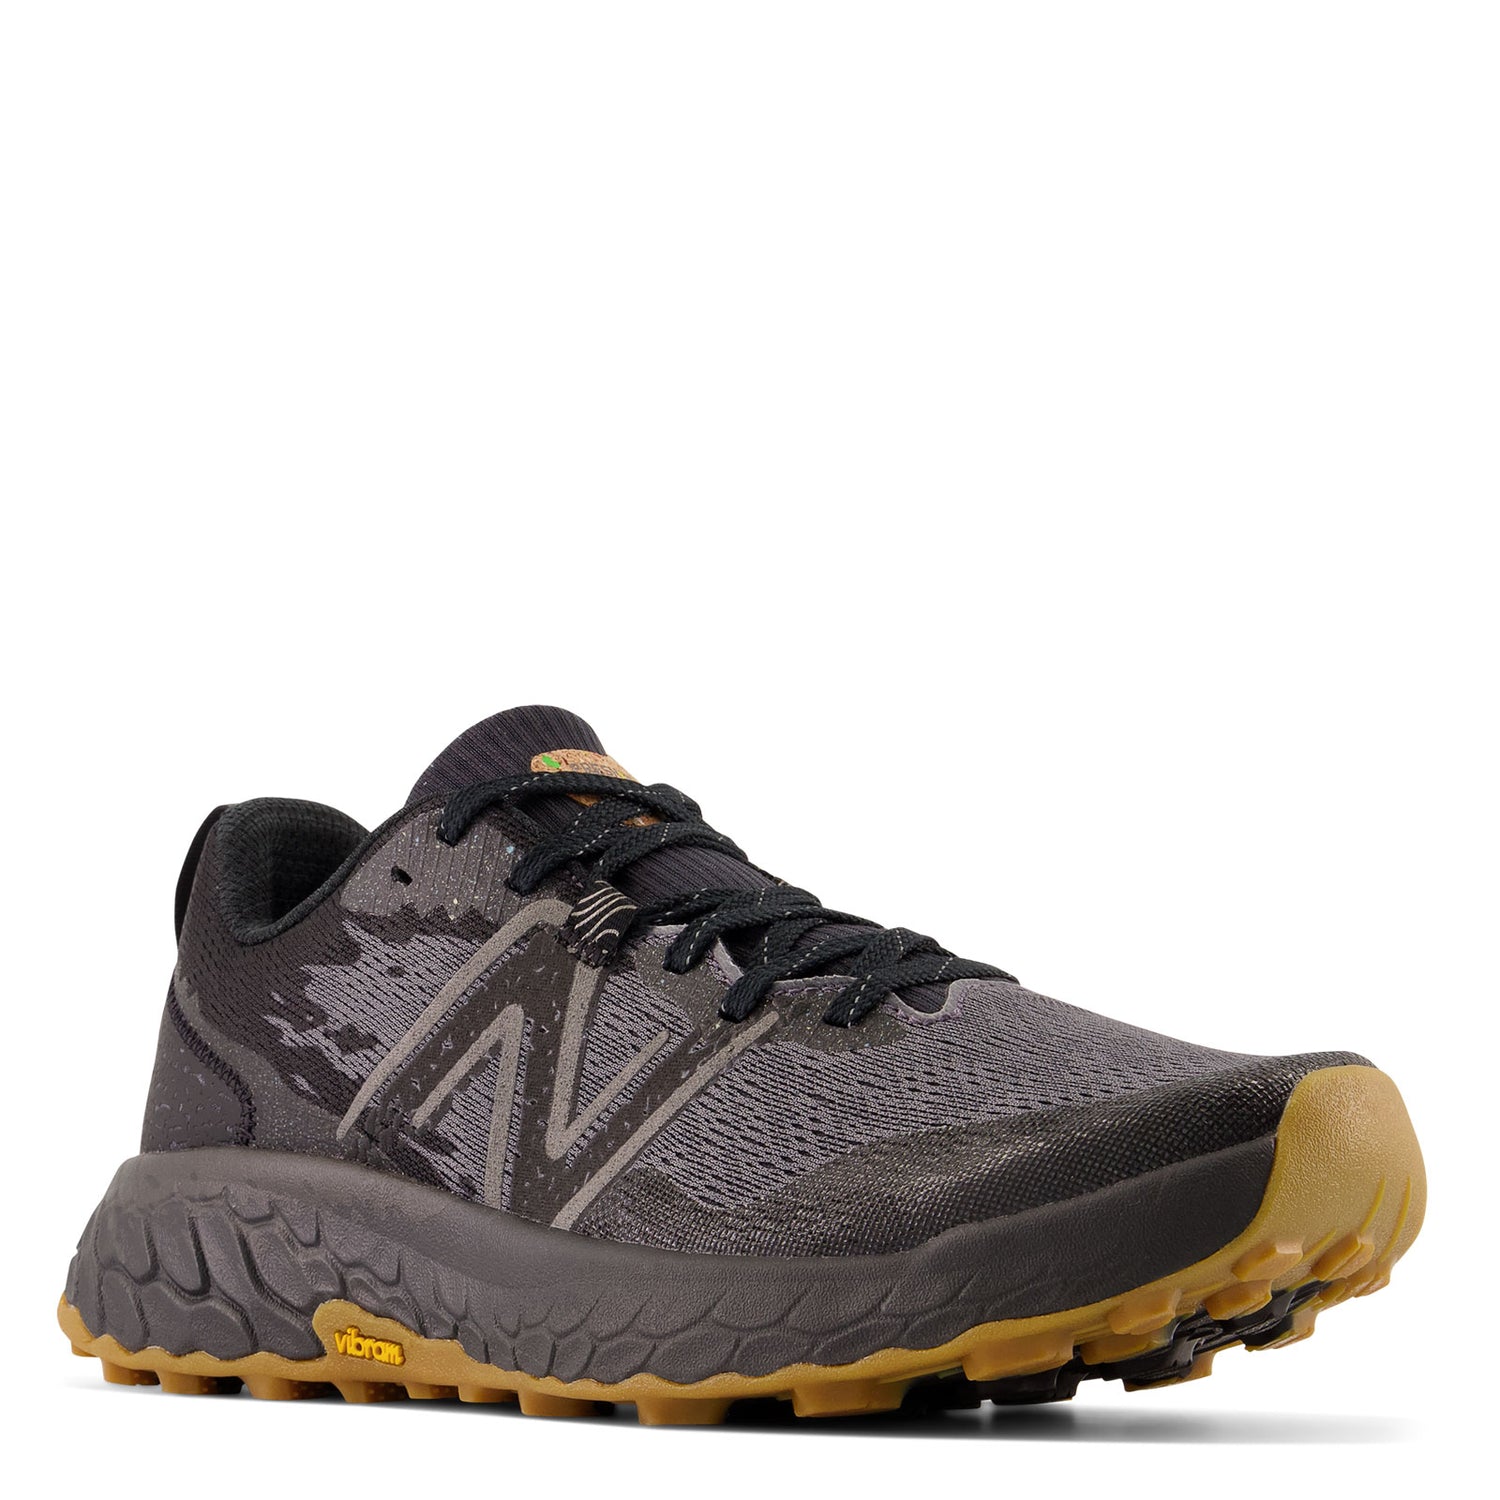 New Balance Speed Ride 690 AT Trail Running Shoes Mens Size 9 Gray